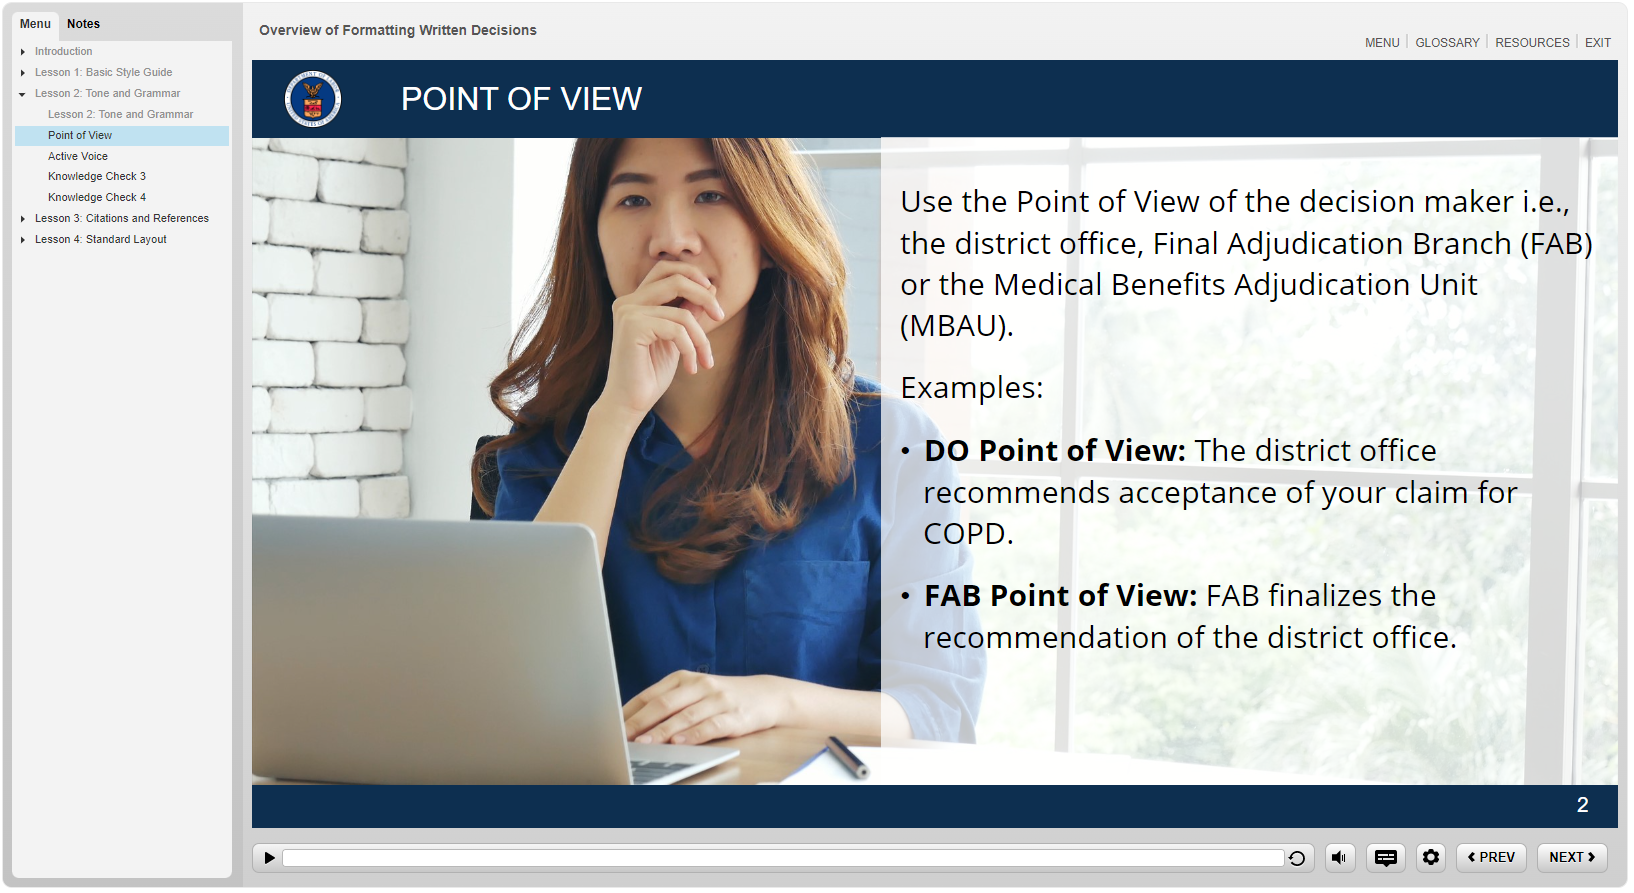 Point of View Slide from Formatting Standards